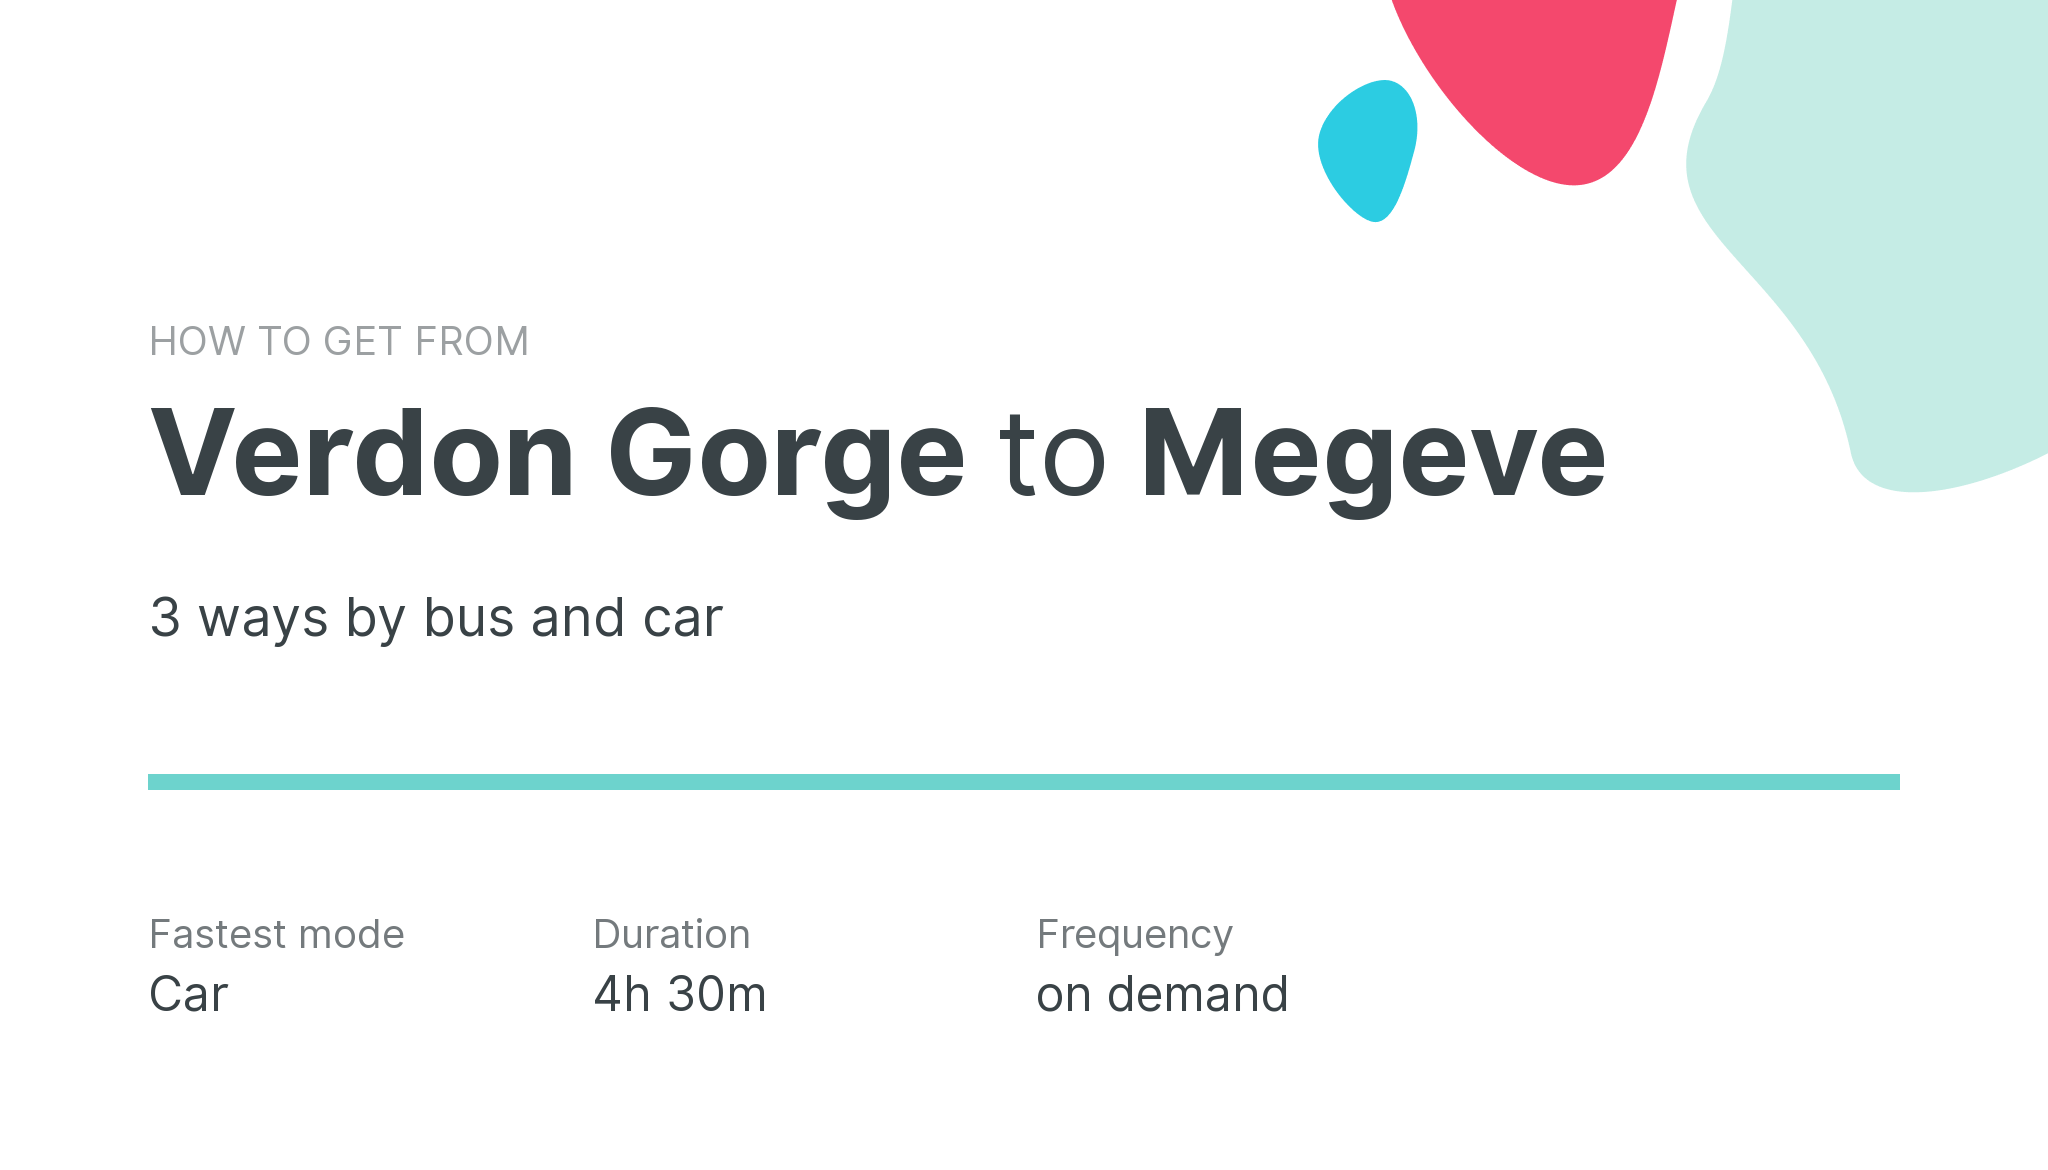 How do I get from Verdon Gorge to Megeve